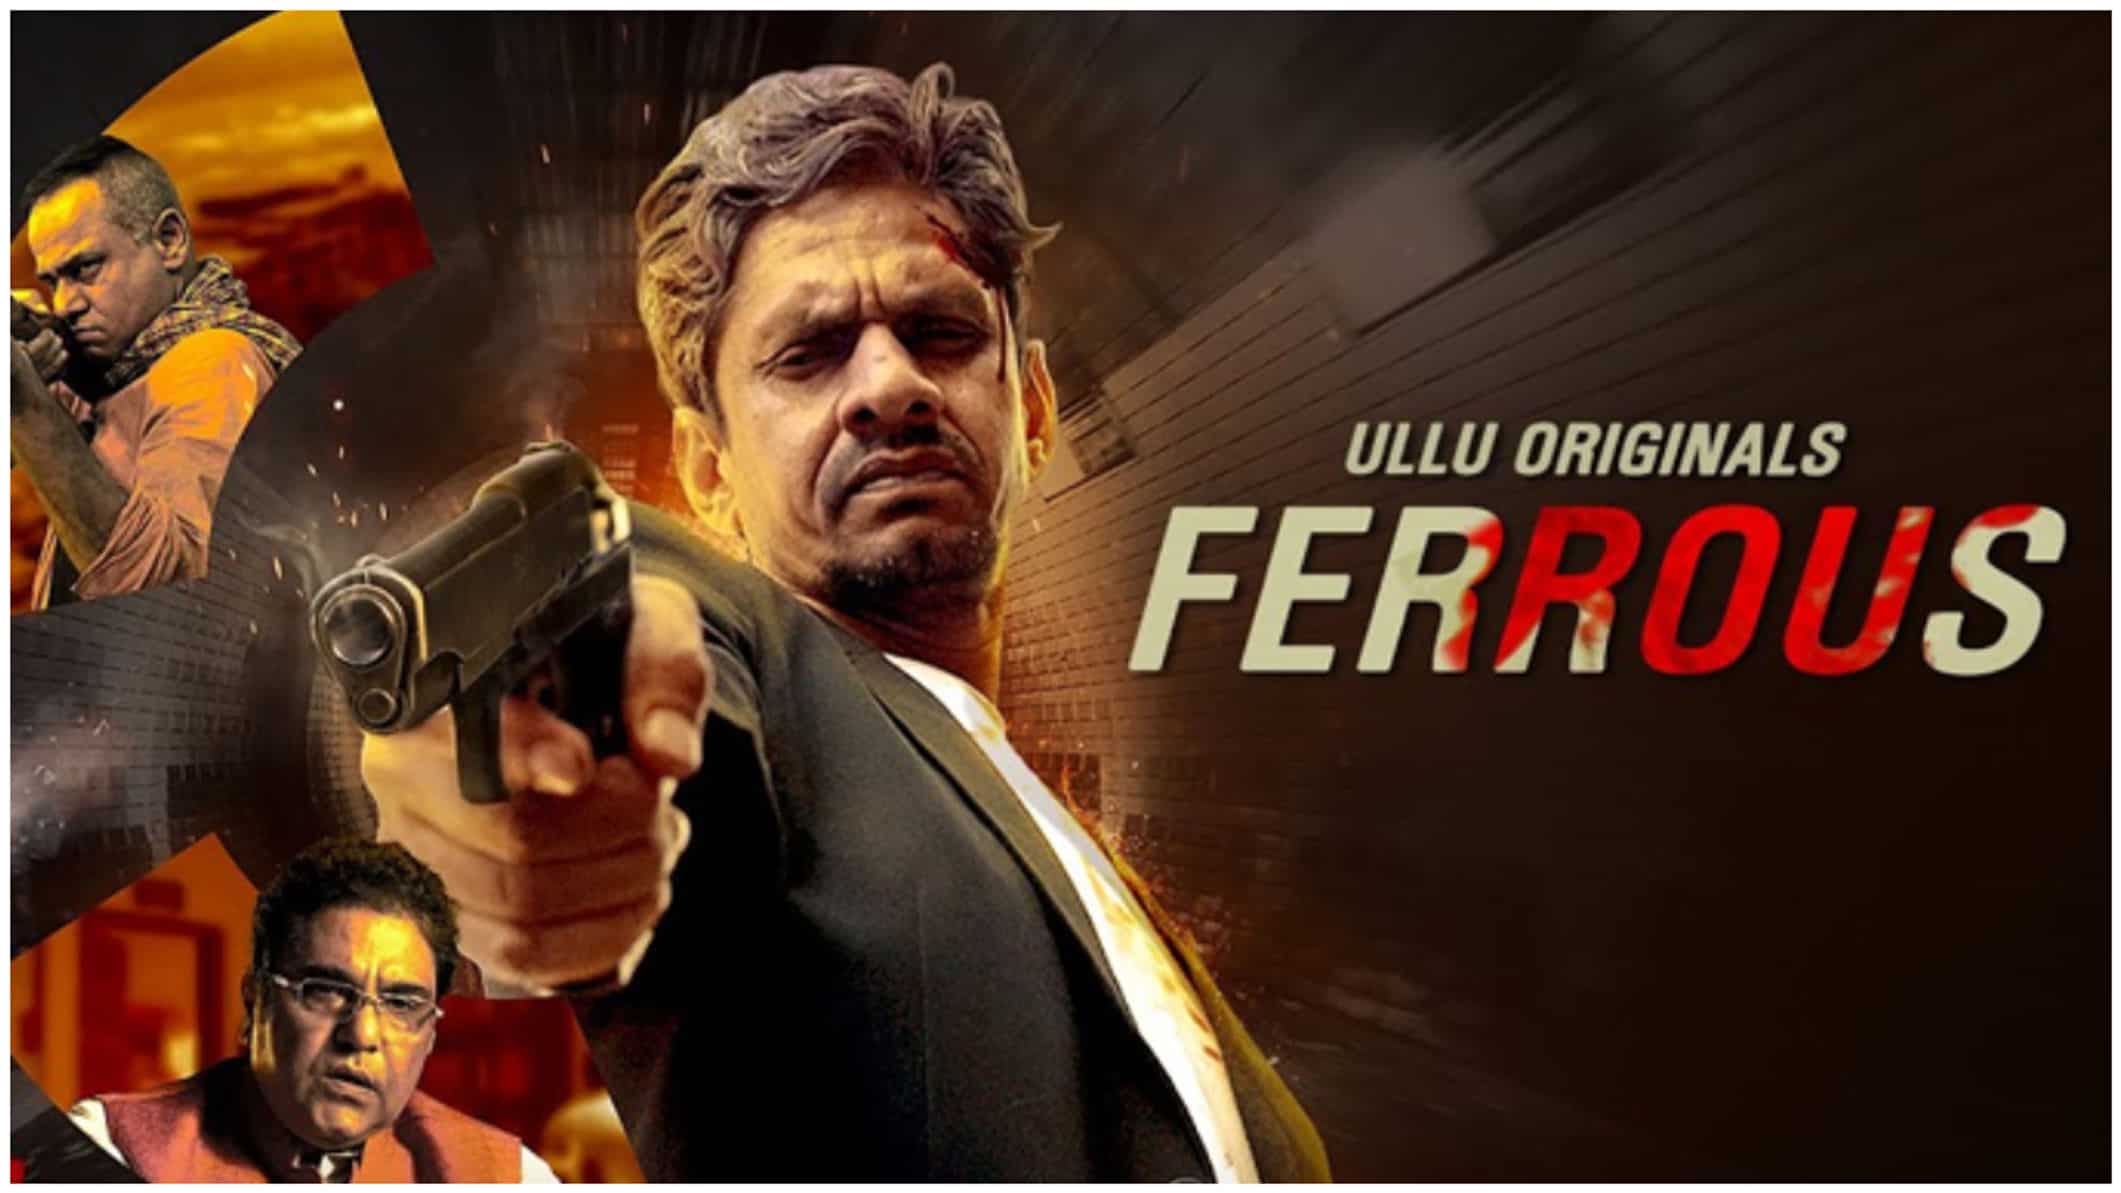 https://www.mobilemasala.com/movies/Ferrous-makes-for-a-truly-gripping-watch-heres-why-you-must-stream-Vijay-Raazs-web-series-on-Ullu-i273010